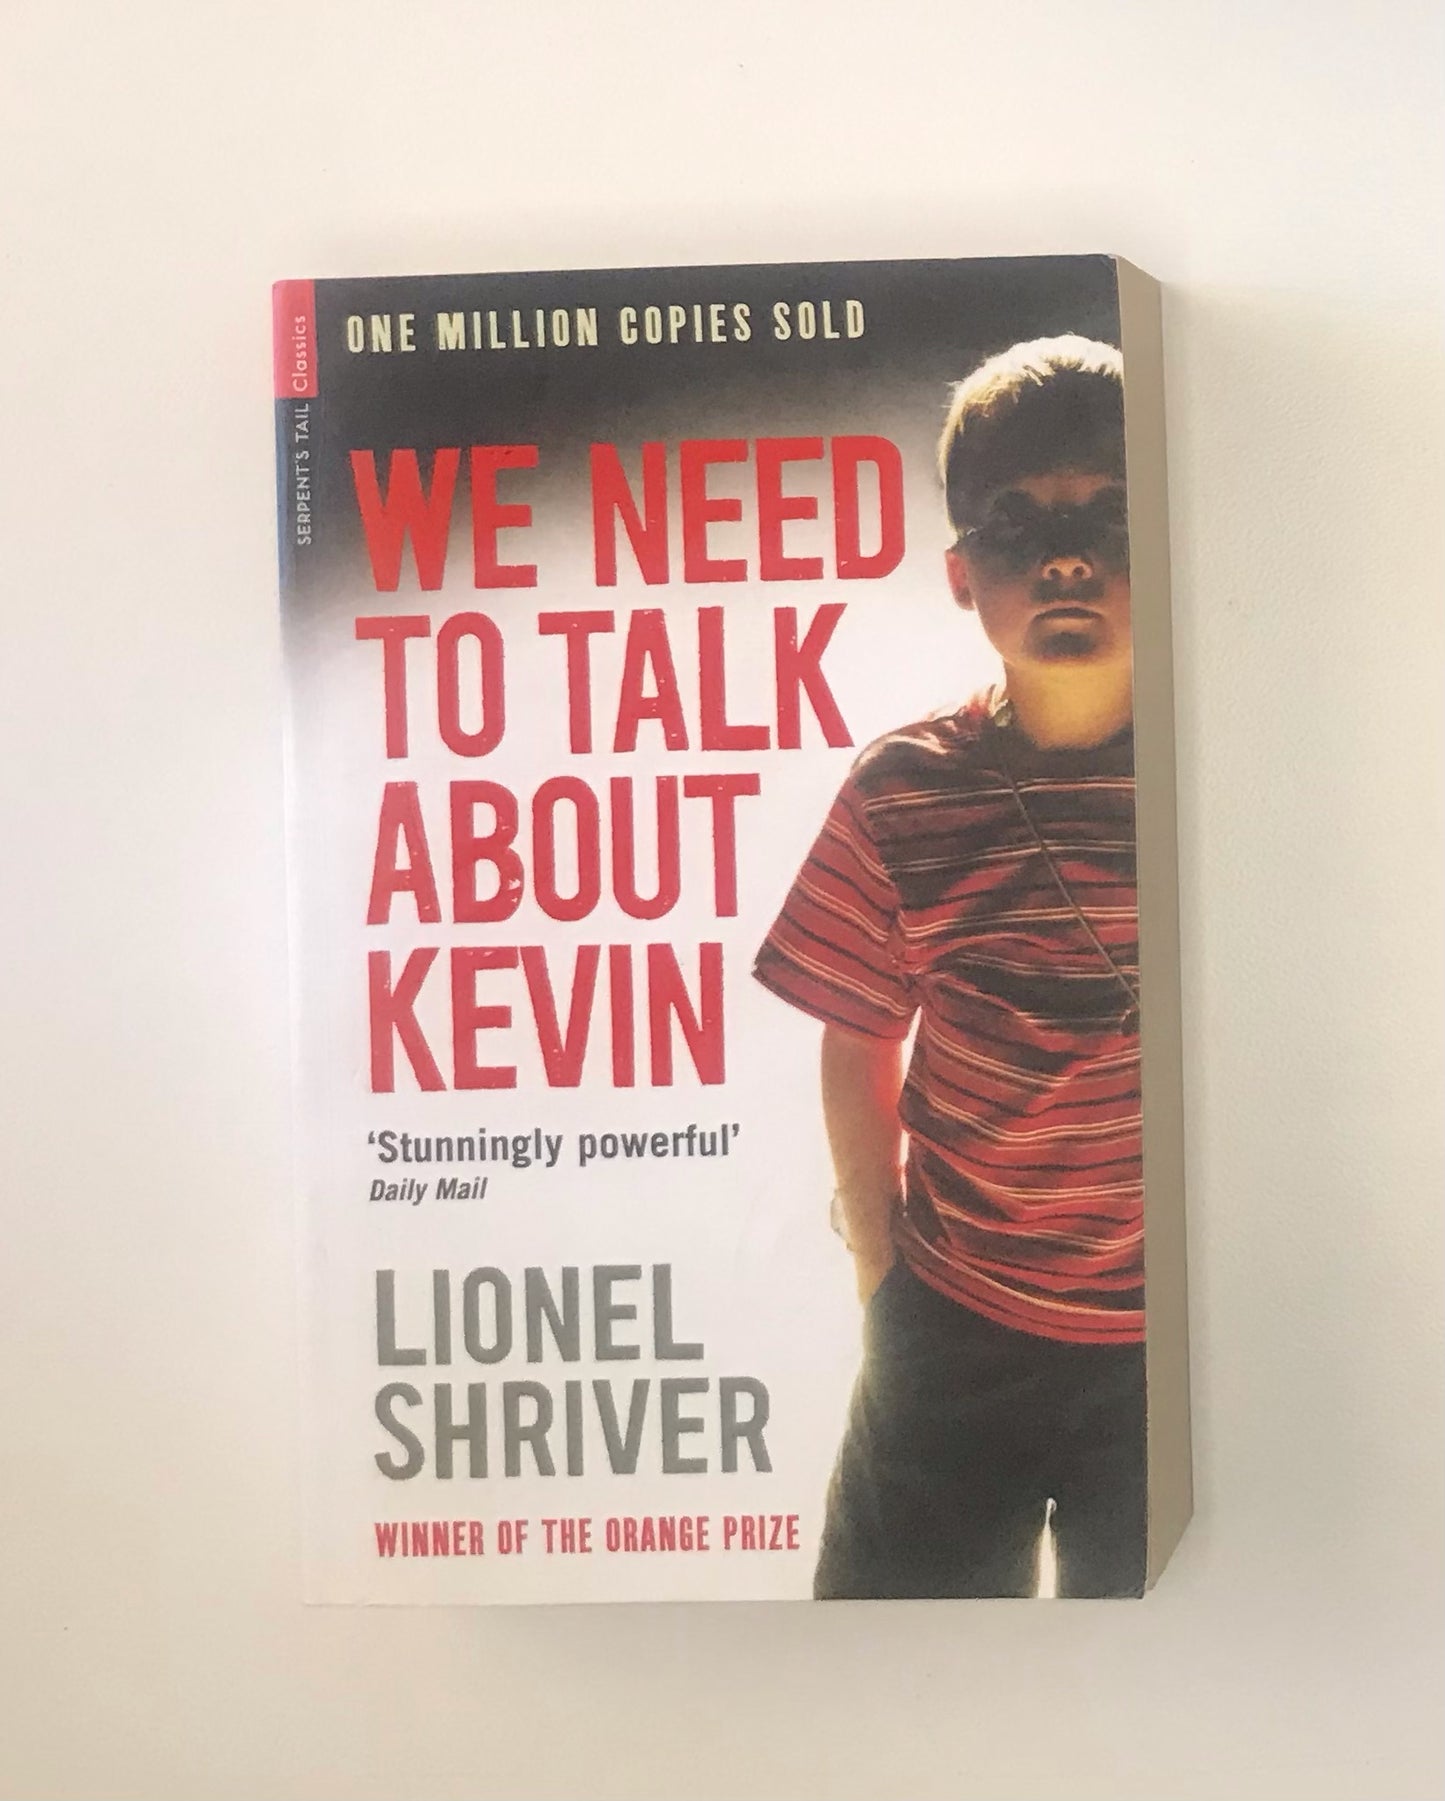 We need to talk about Kevin - Lionel Shriver